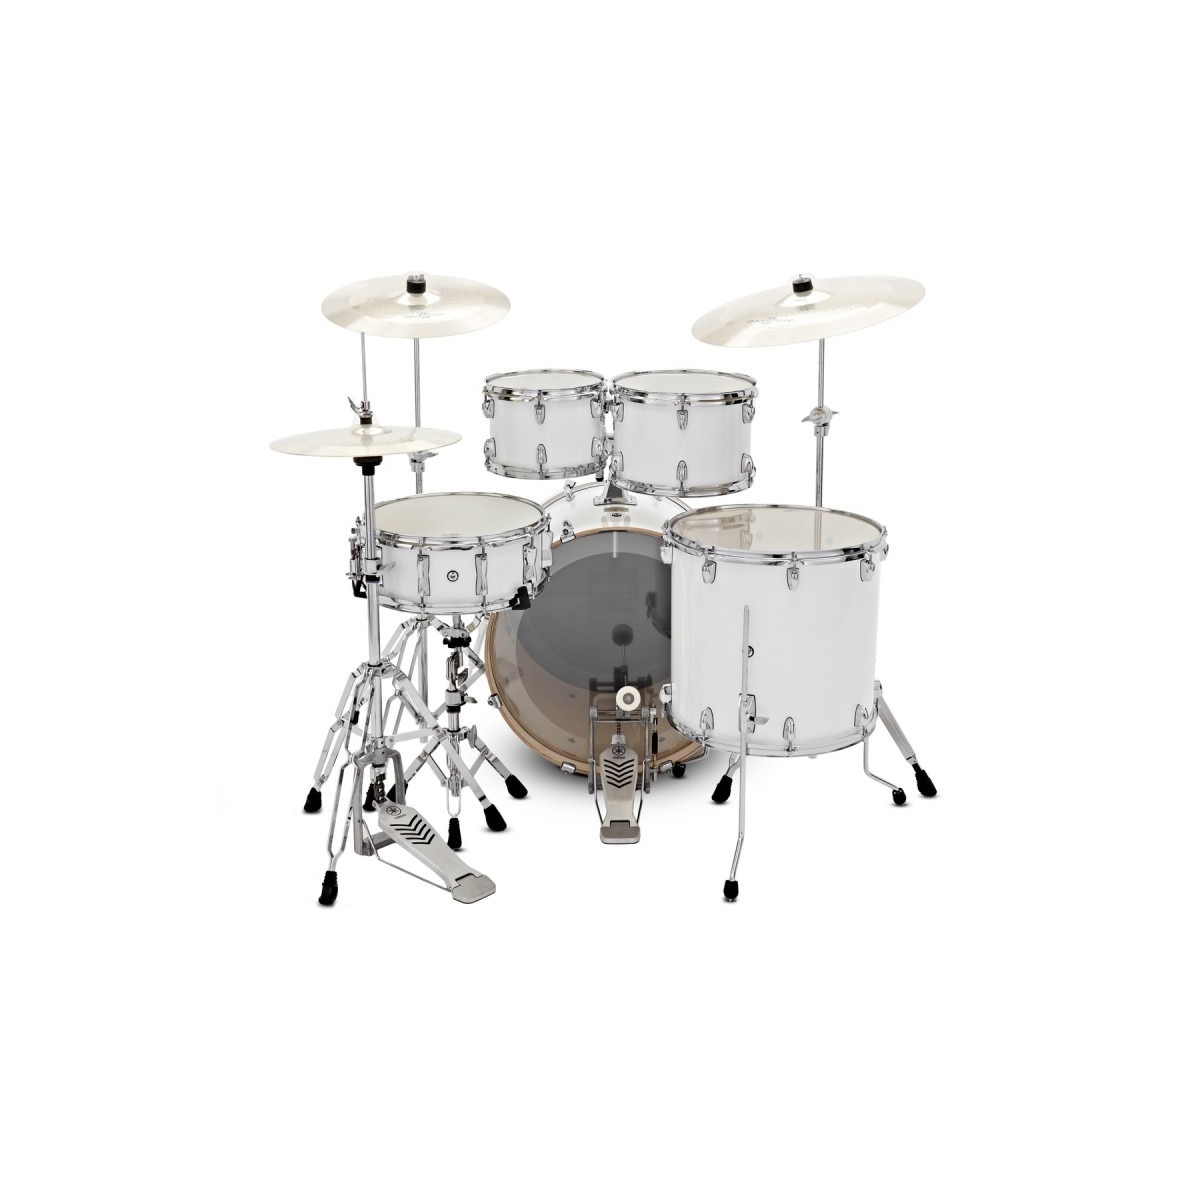 Stage Custom Birch Standard 22 Natural Wood + accessoires